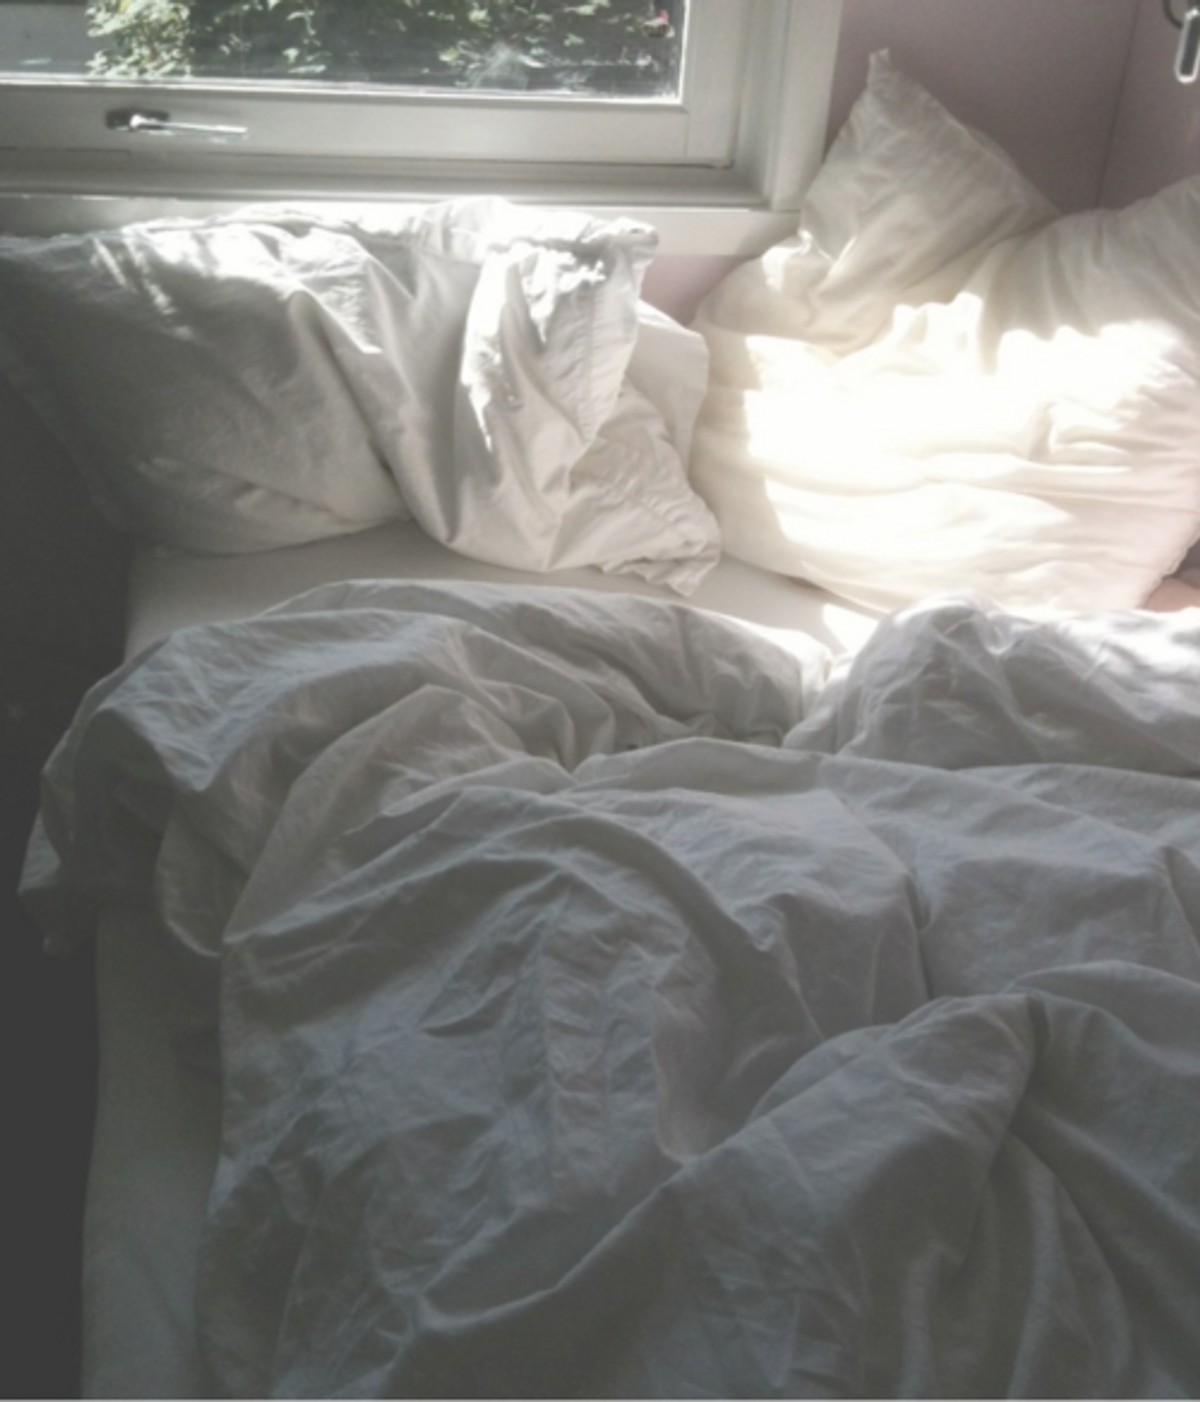 27 Things College Students Think Before Leaving Bed